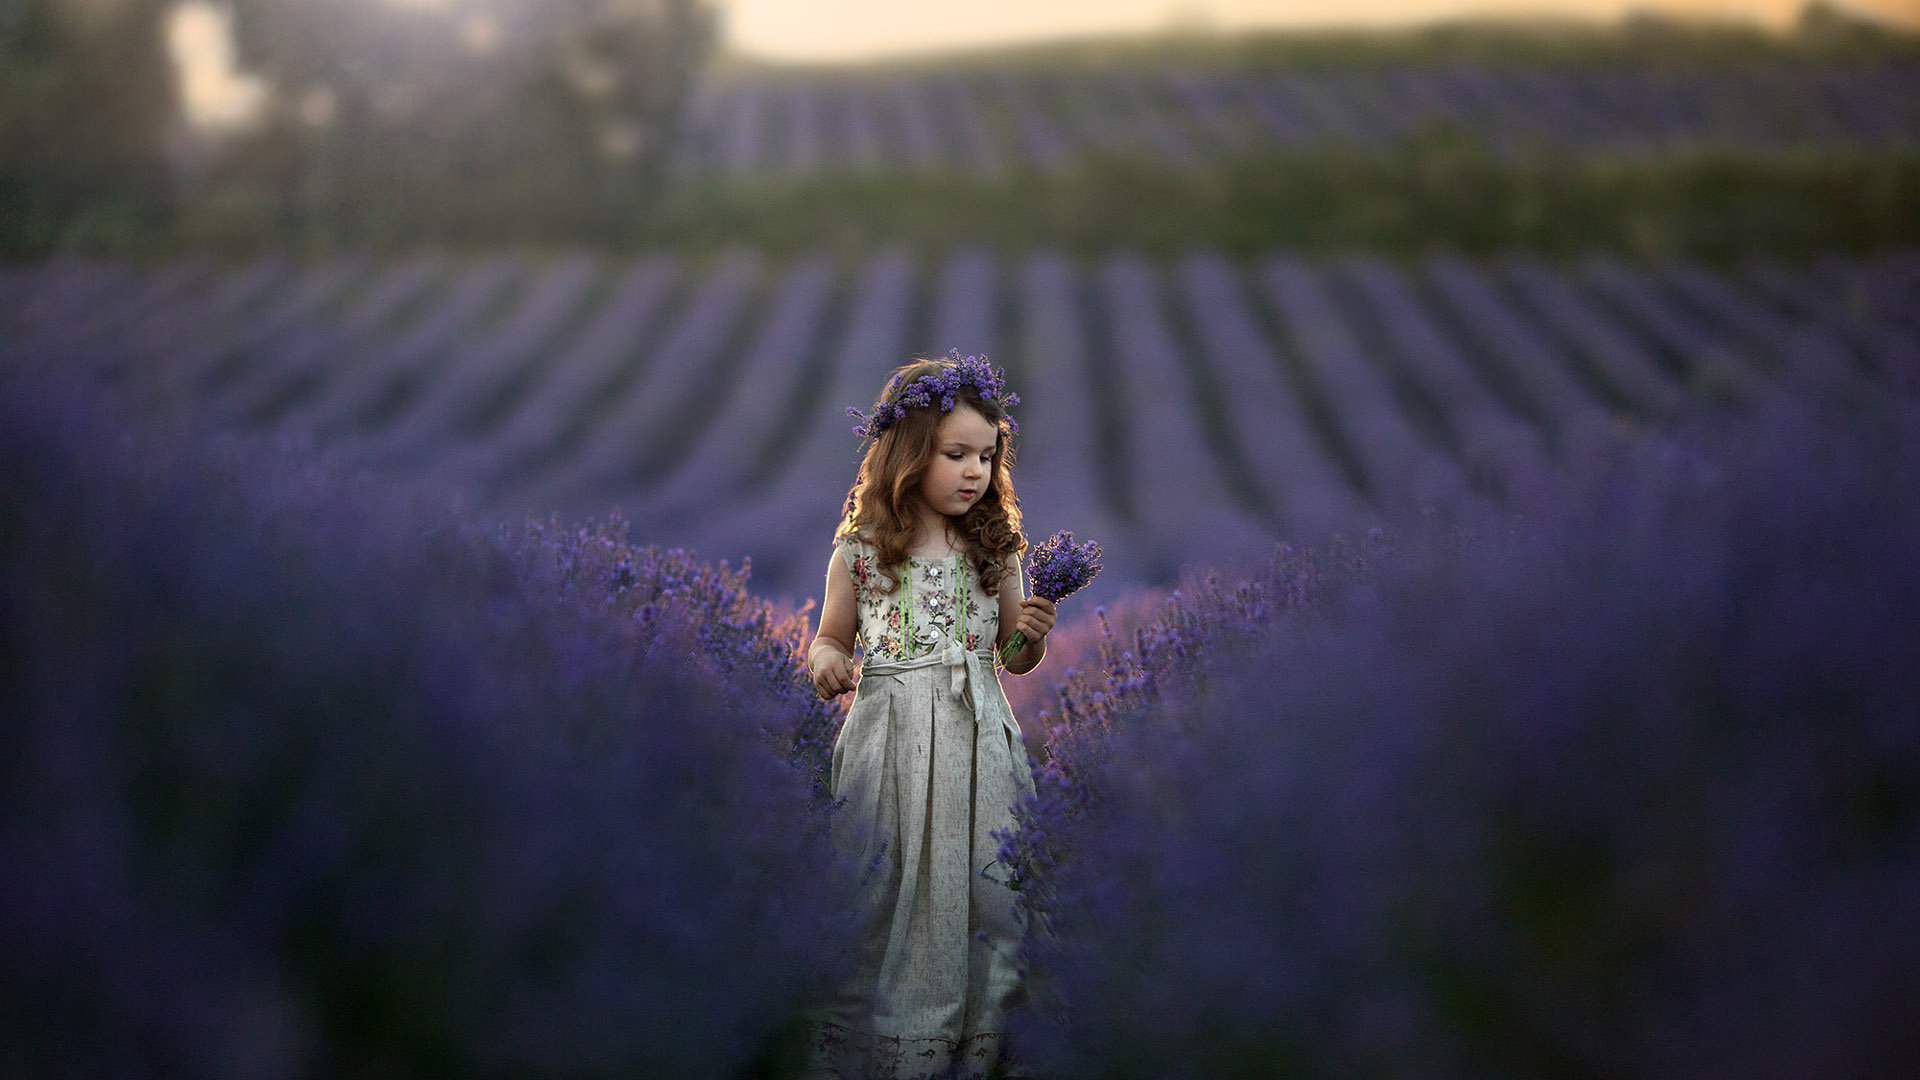 Little Cute Girl Is Standing In Lavender Field With Lavender Flowers Wearing White Dress And Wreath 2K Cute